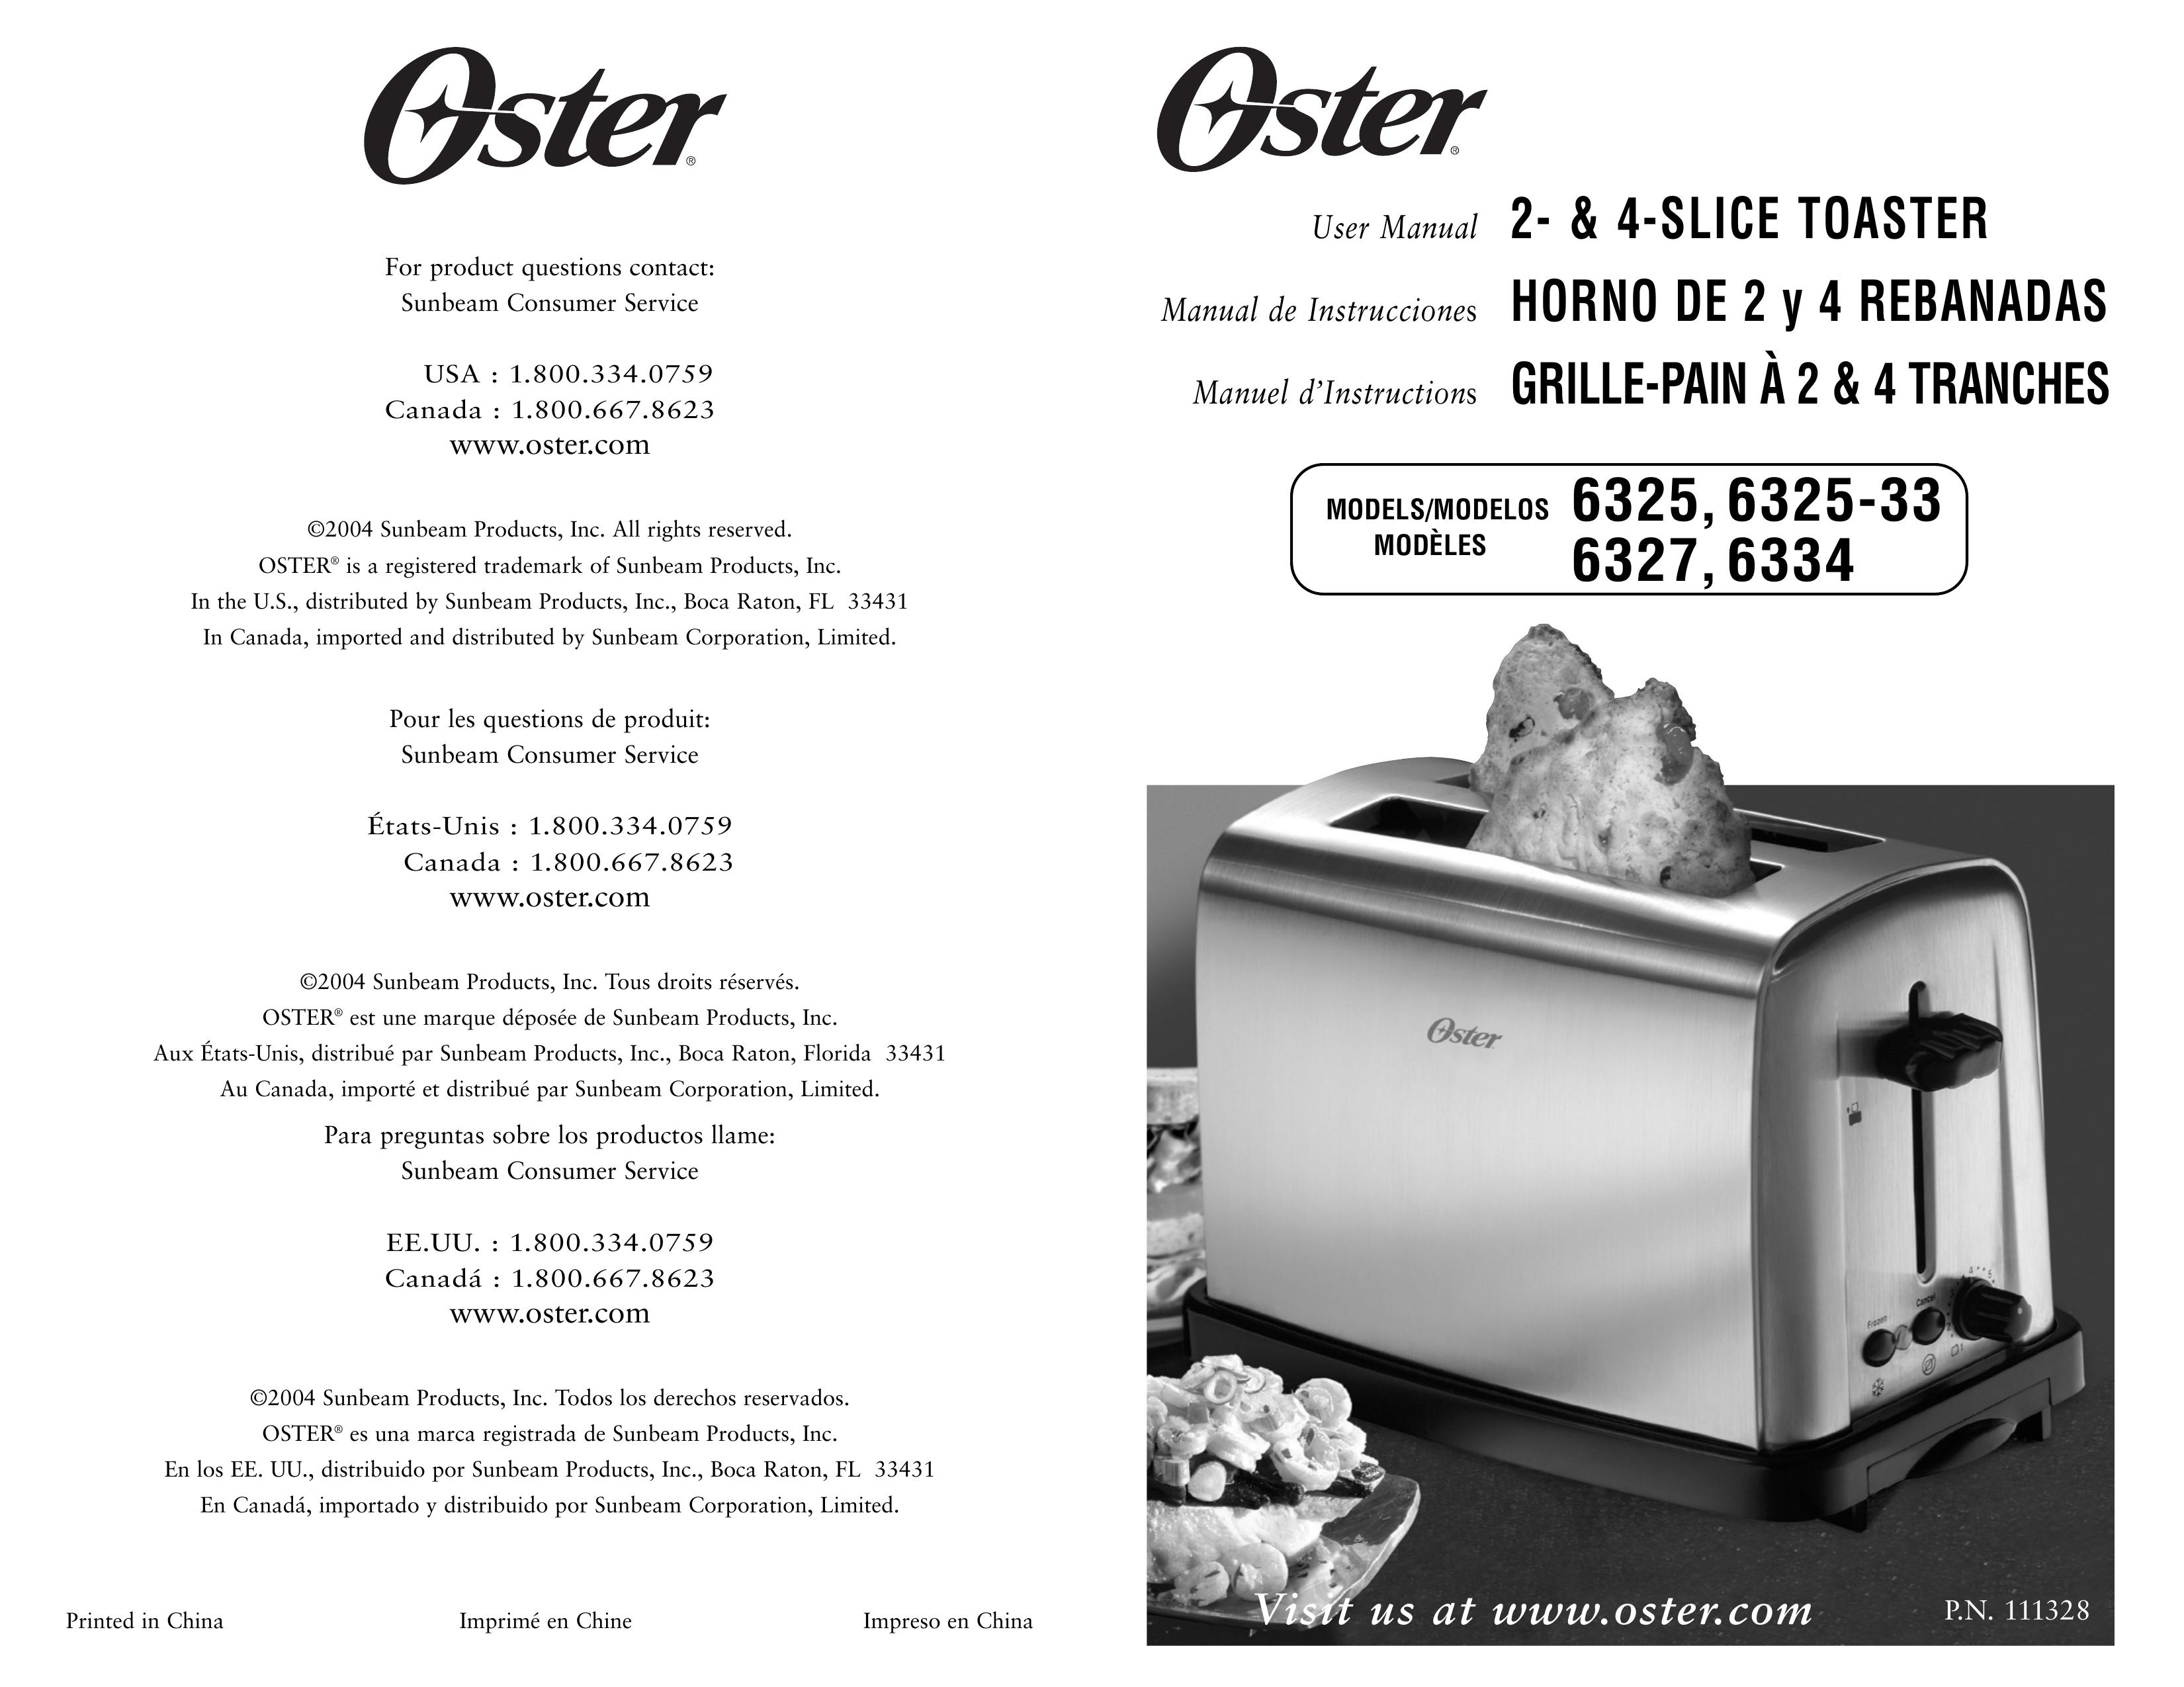 Oster 6325 Toaster User Manual